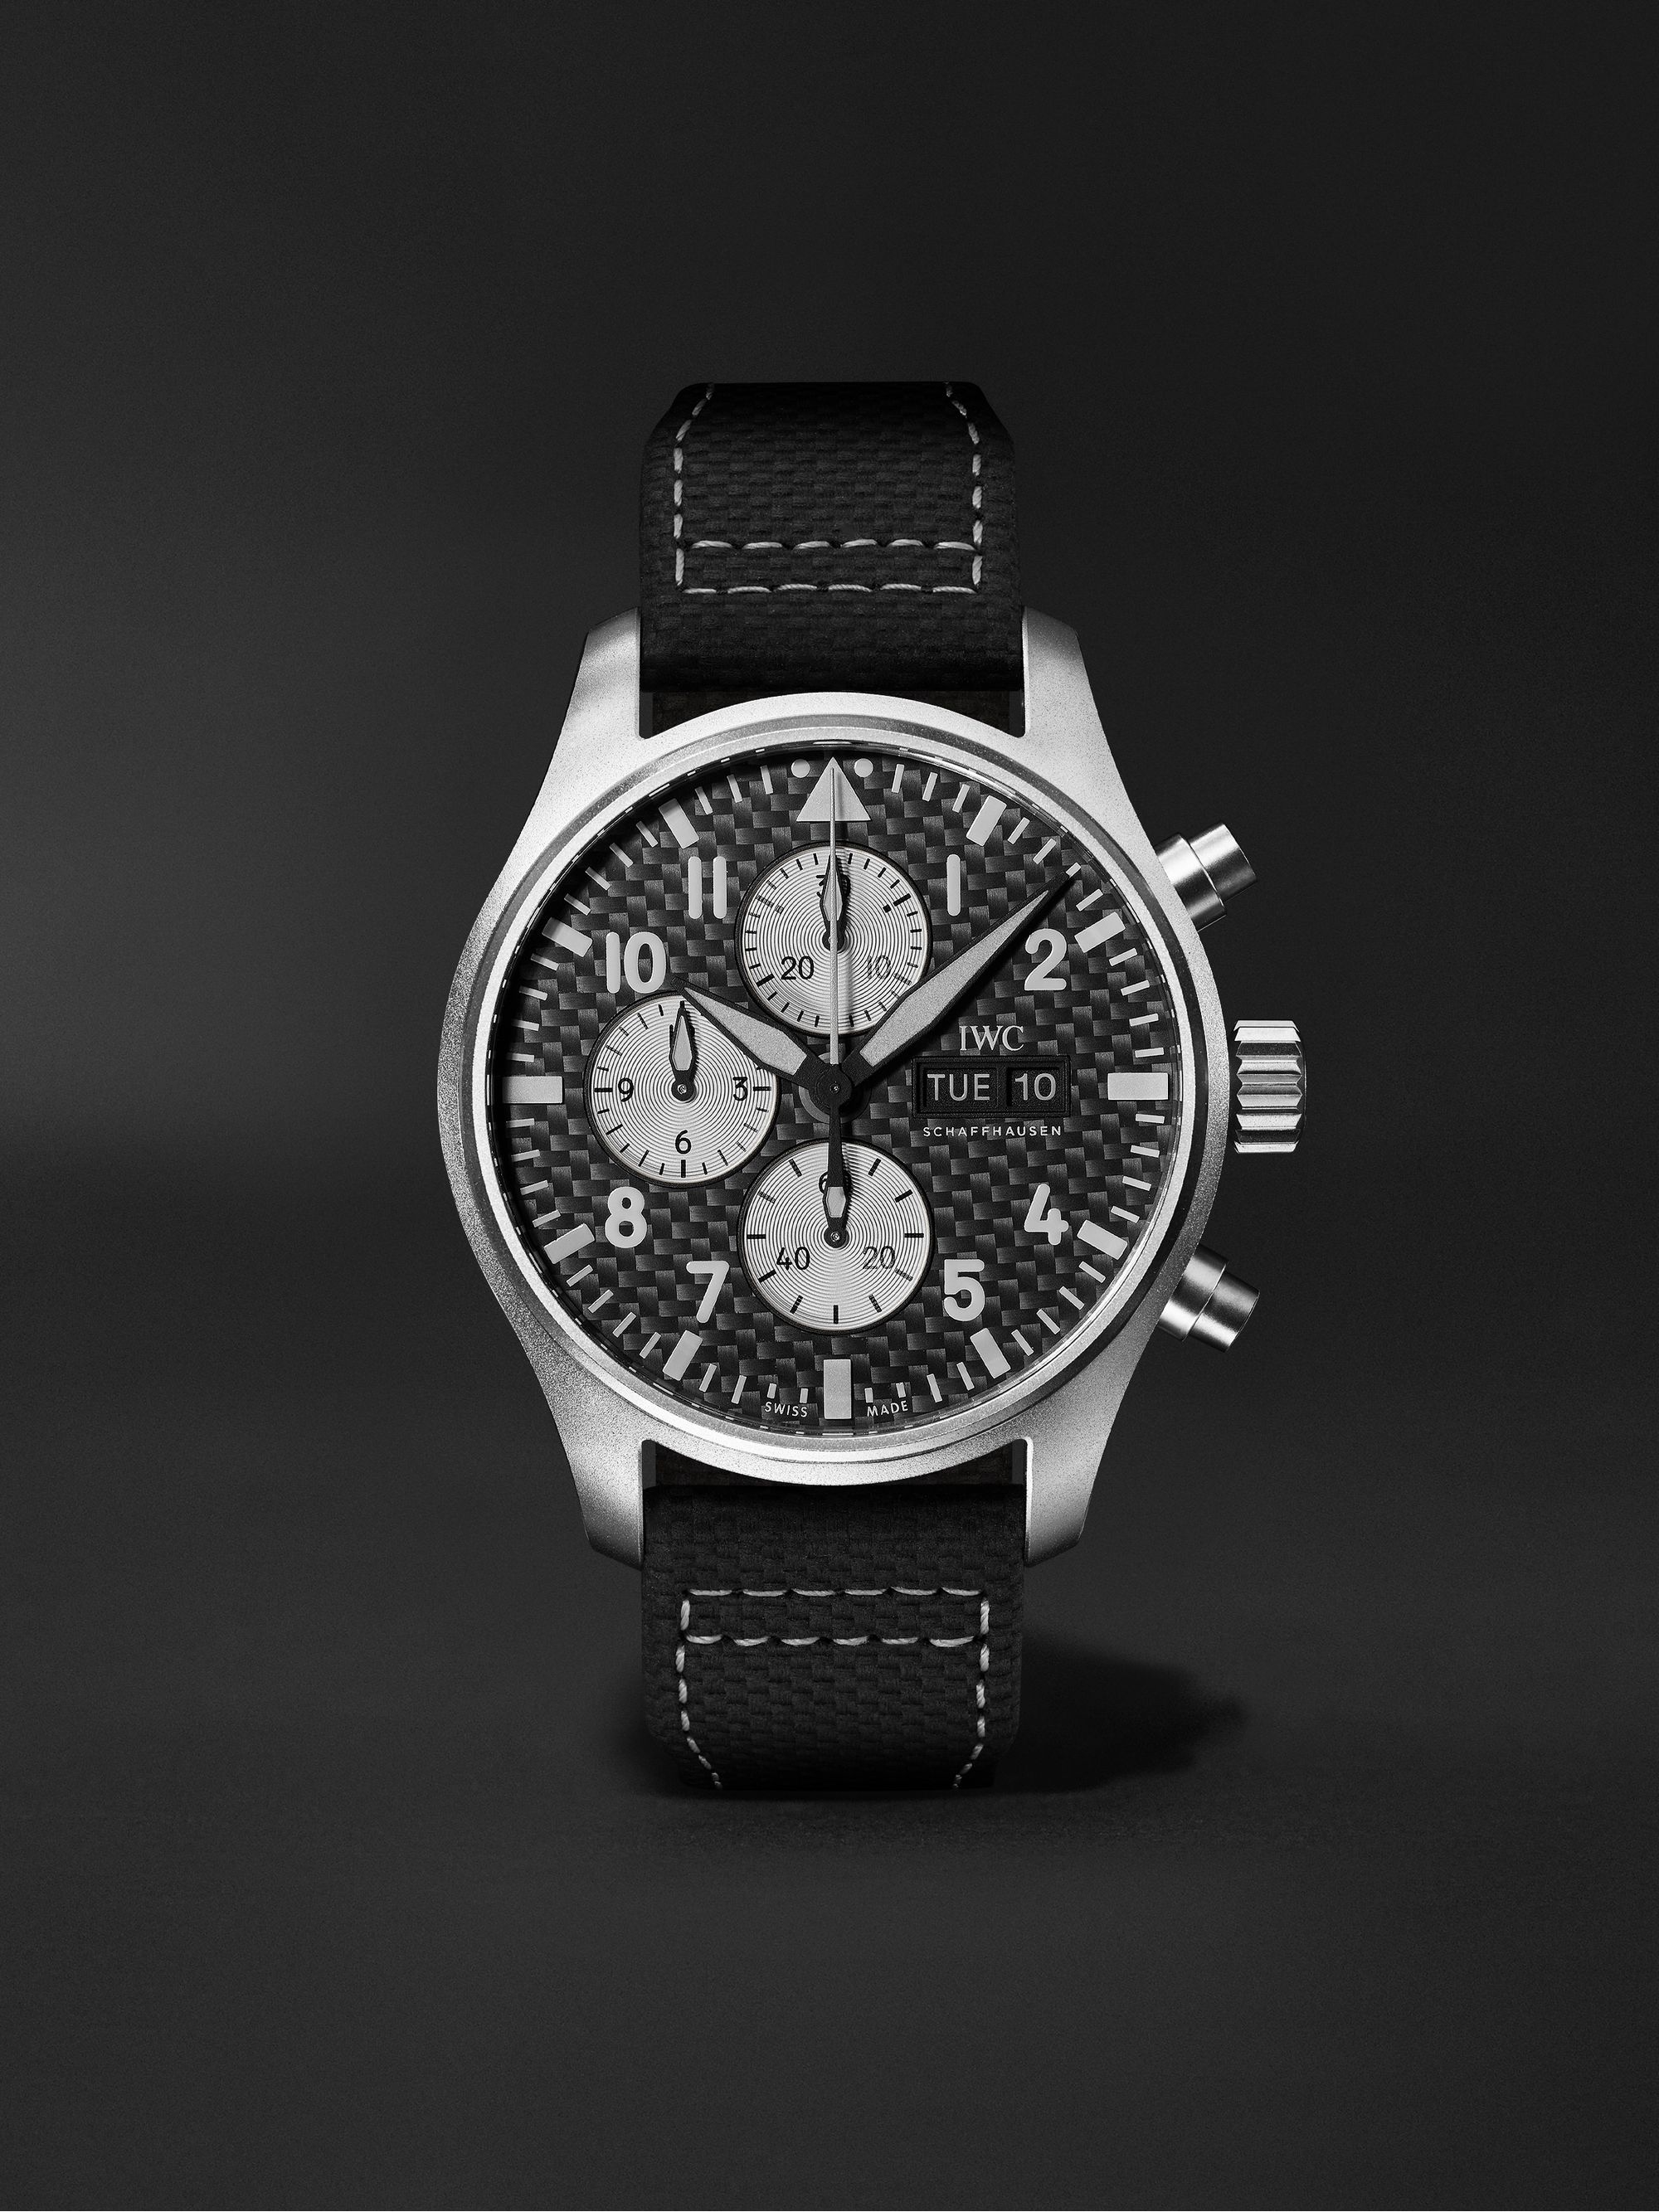 IWC SCHAFFHAUSEN Pilot's Limited Edition AMG Automatic Chronograph 43mm Titanium and Leather Watch, Ref. No. IW377903